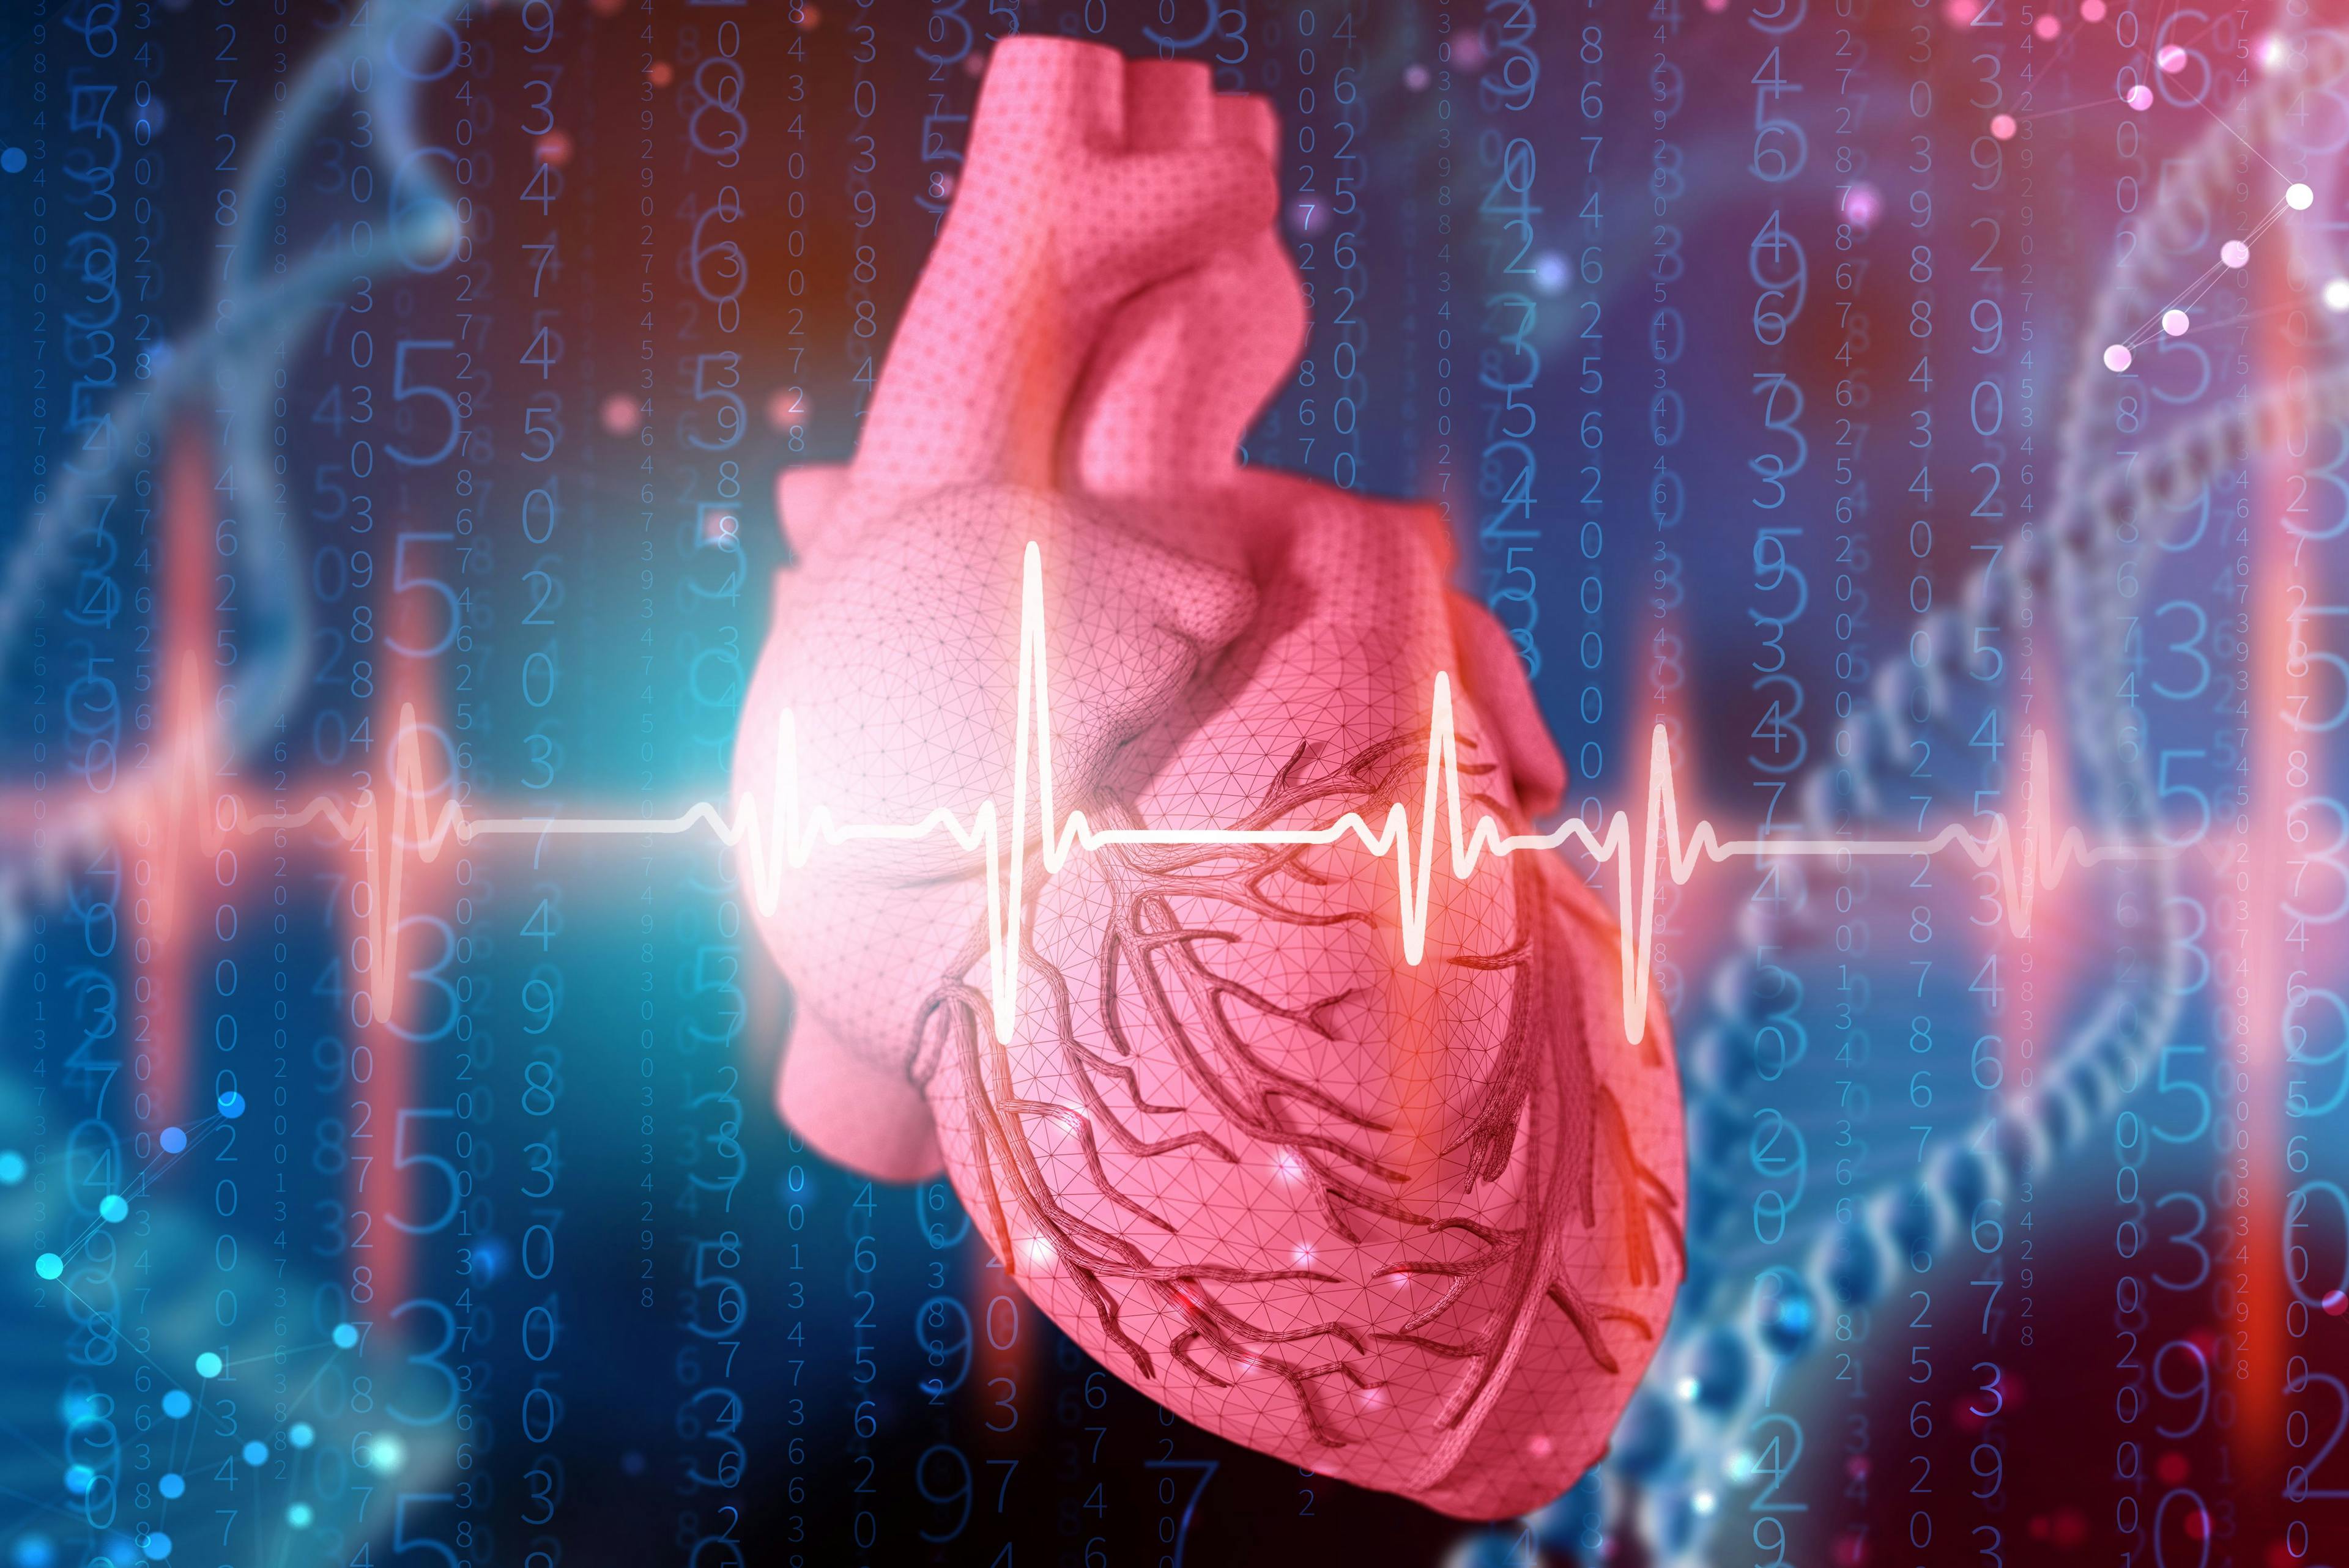 human heart and cardiogram on futuristic blue background for cardiovascular disease image | Image Credit: Artem - stock.adobe.com